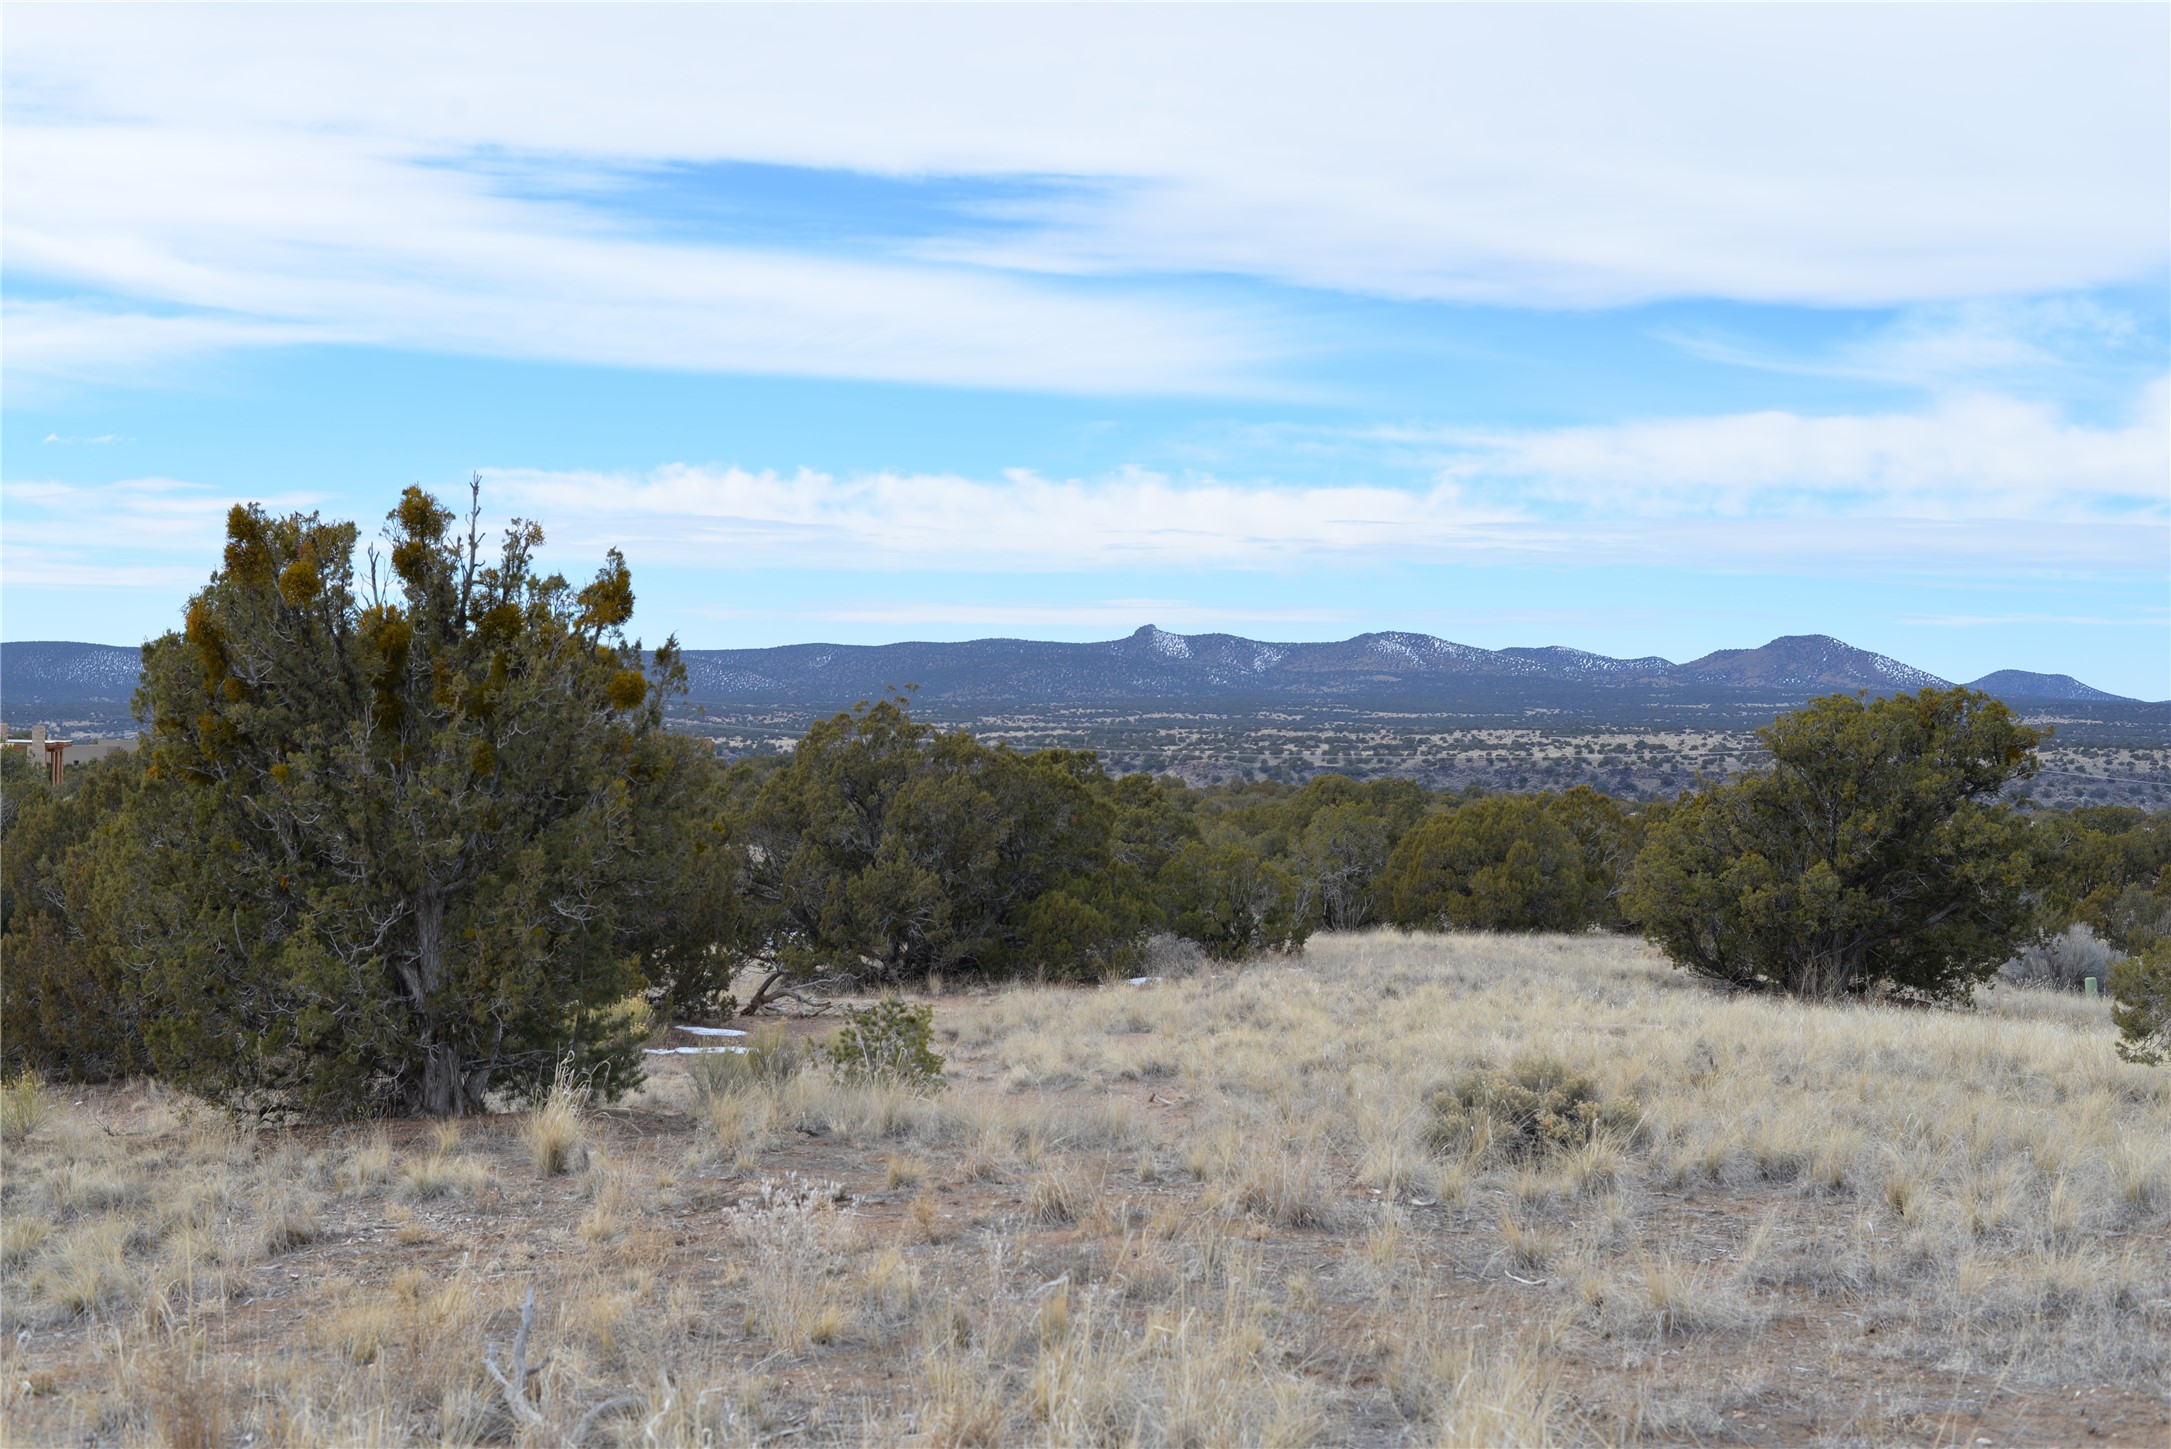 Looking West from property, across 18,000 acre tract of the Santa Fe National Forest.